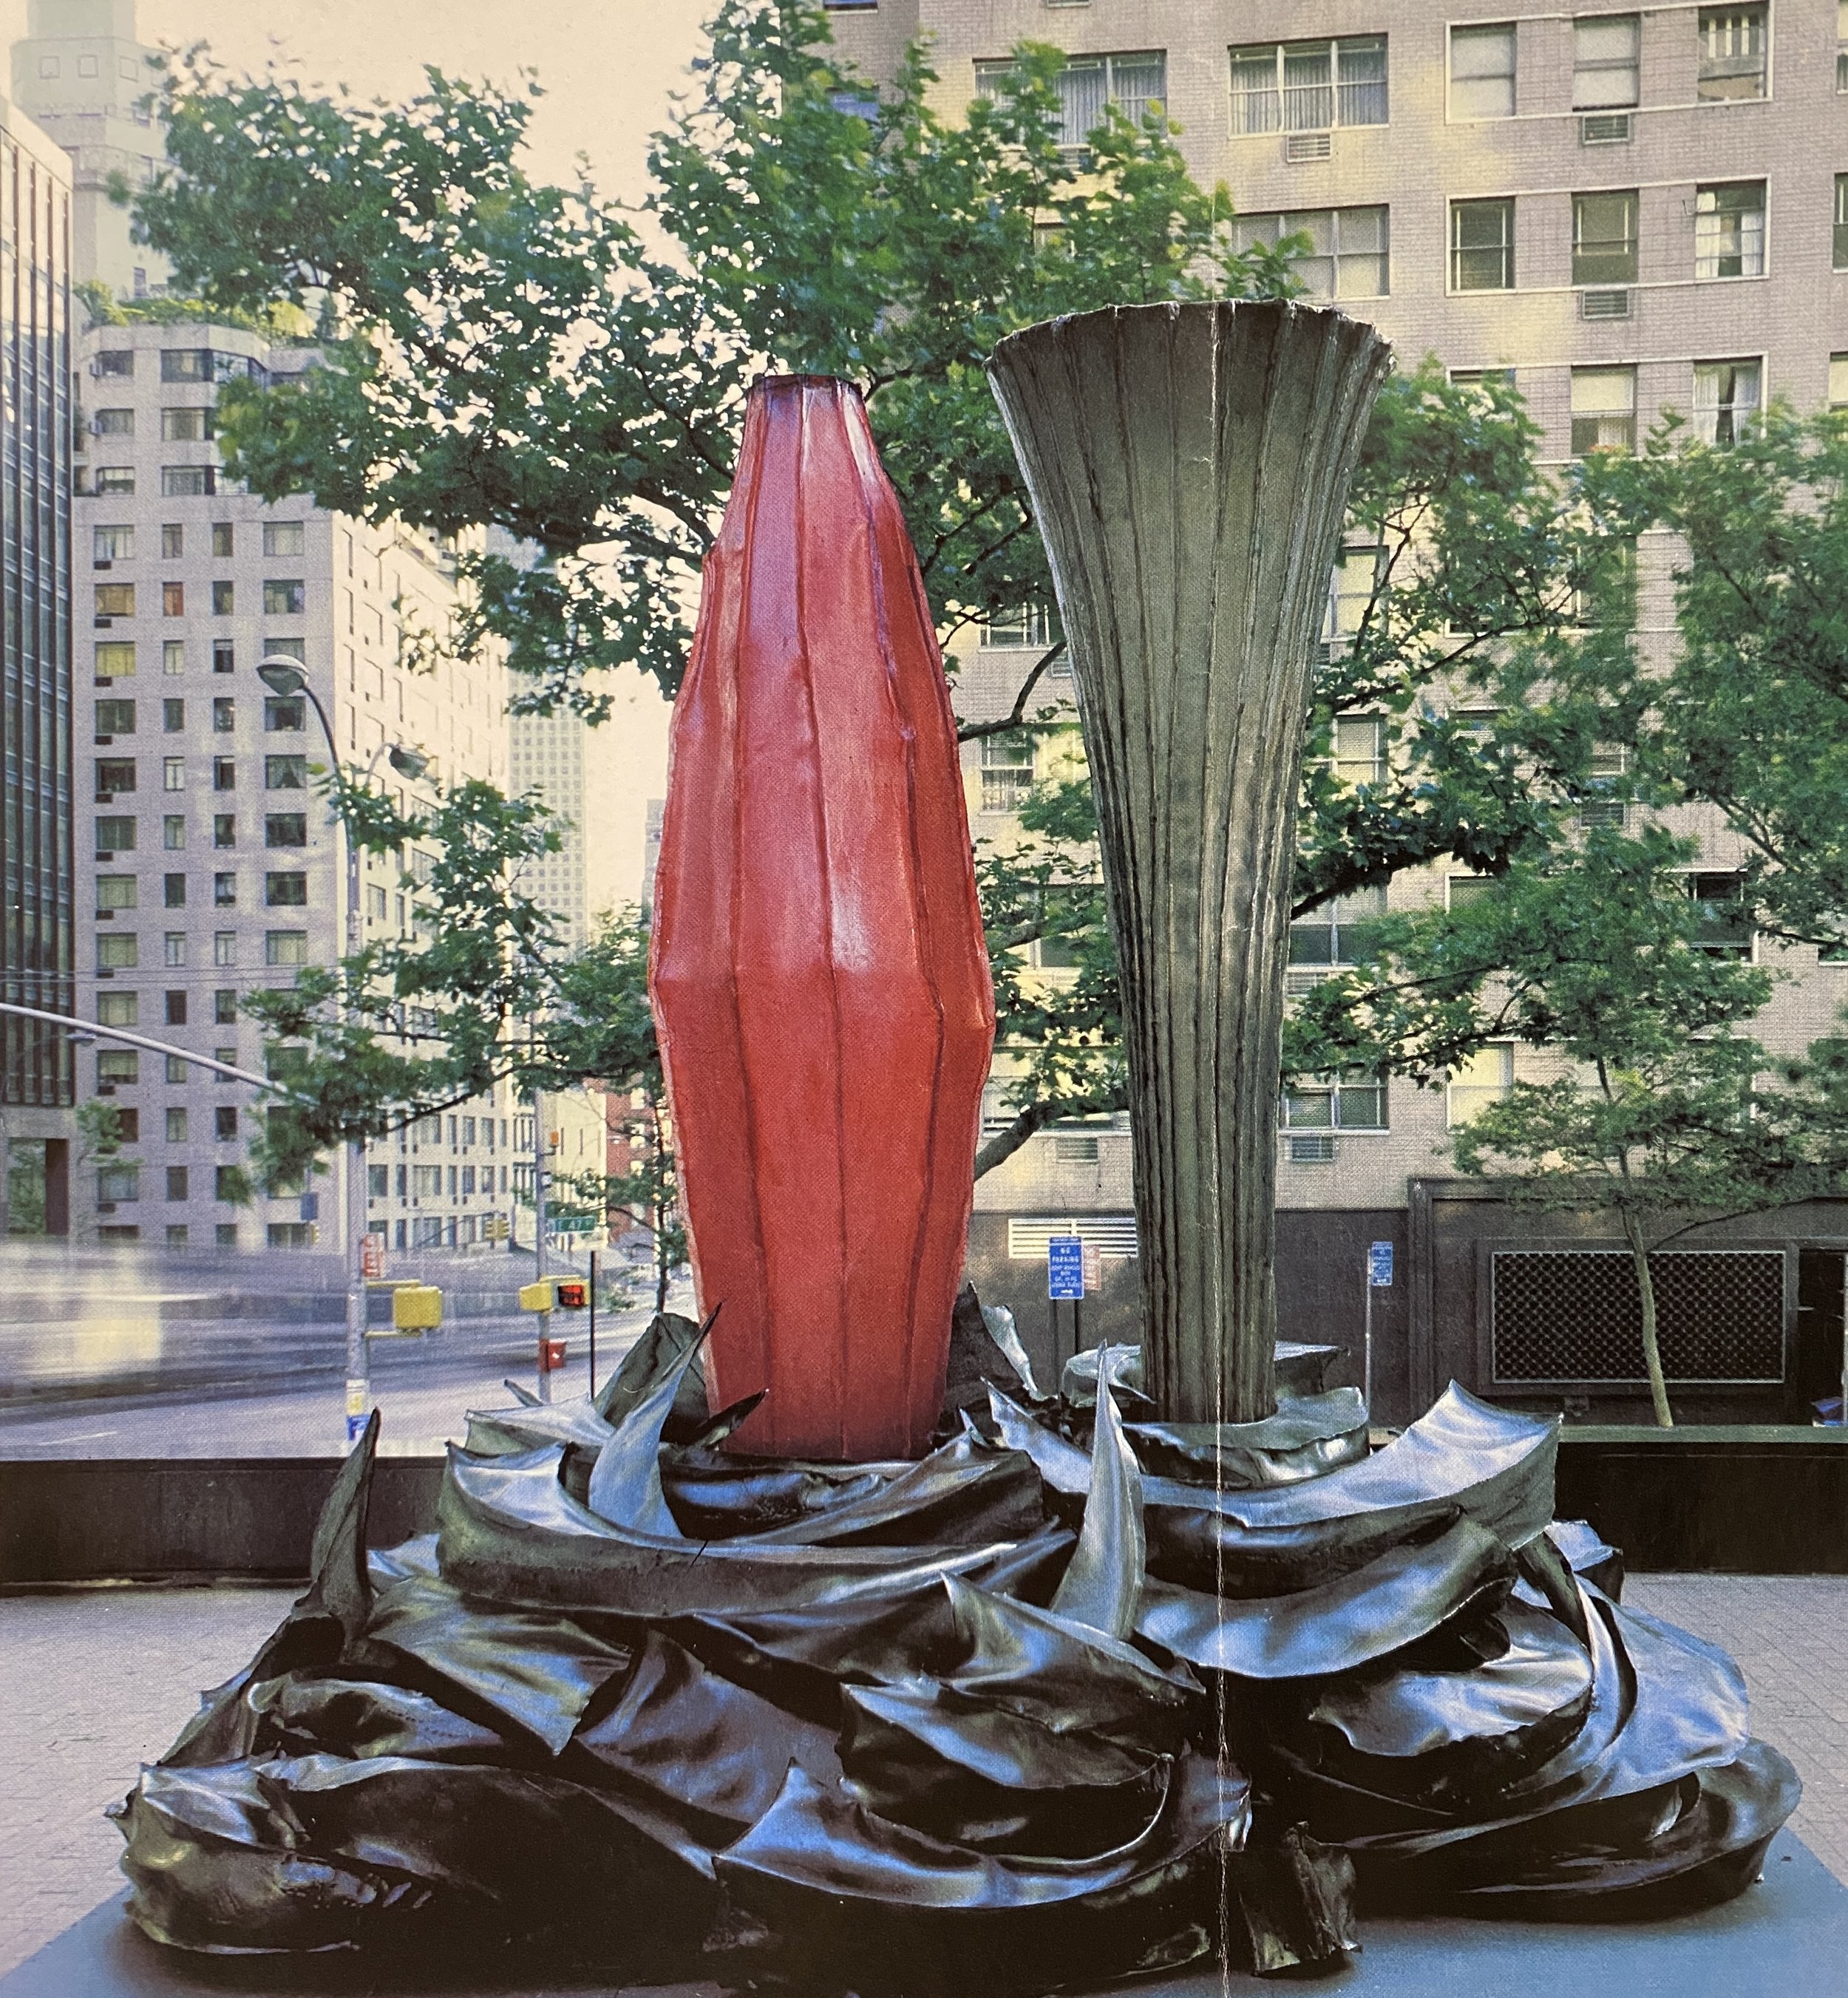  W.H./M.M.D., 1983, fiberglass and resin, 16’ high (4.87 meters), Hammarskjold Plaza Sculpture Garden, Second avenue at 47th St., New York City (photo: Peter Bellamy)  Cryptically titled W.H./M.M.D., this three-part sculpture is Tom Butter’s second l